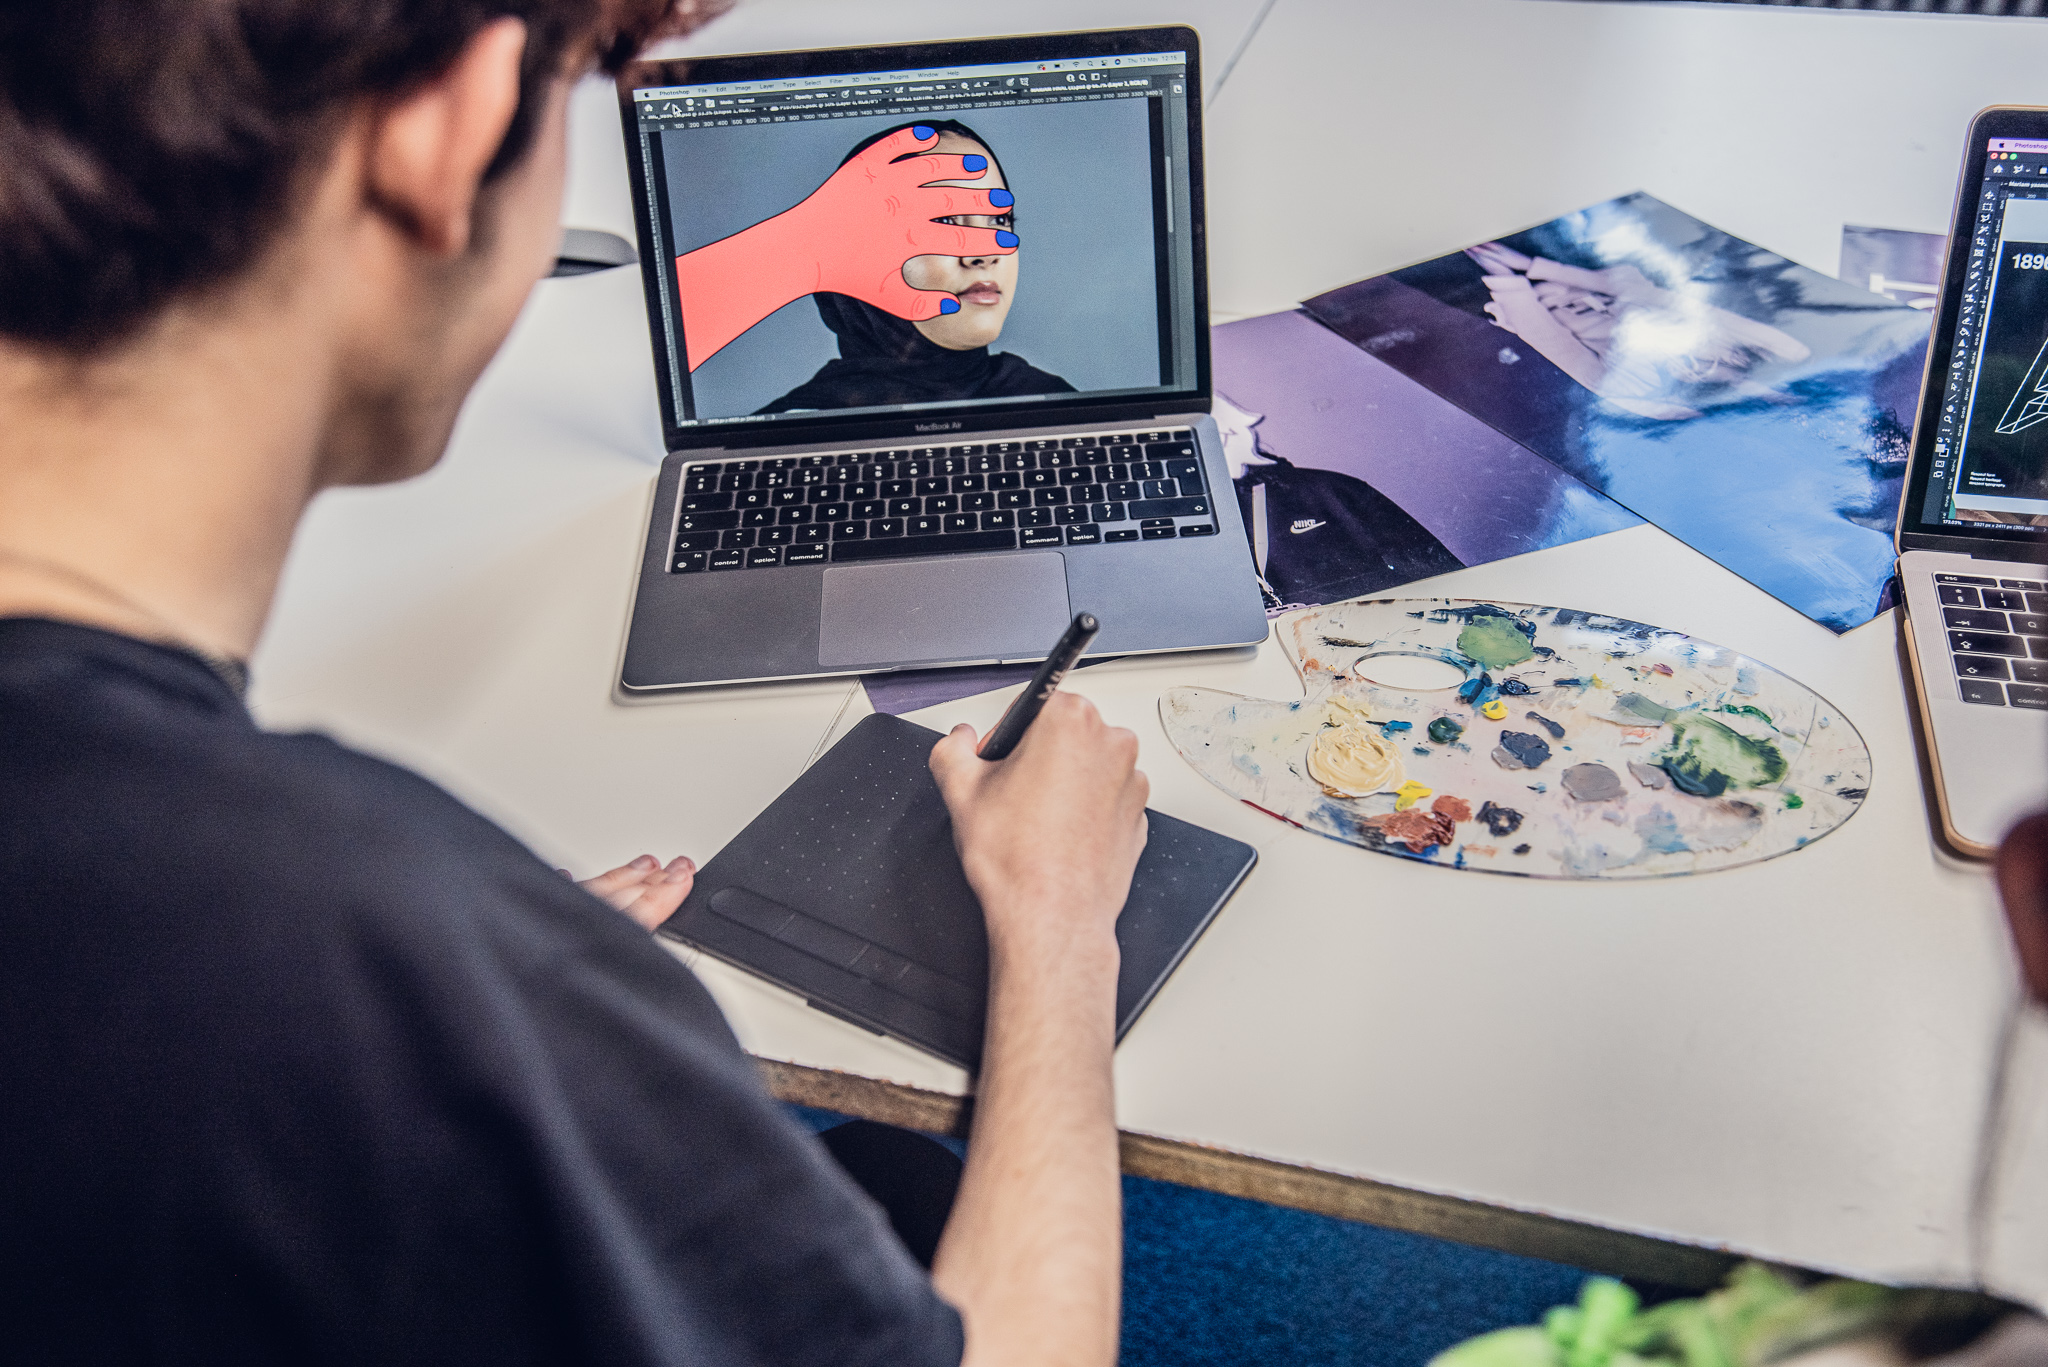 Graphic design student editing an image of a cartoon hand over a real woman's face, using a tablet